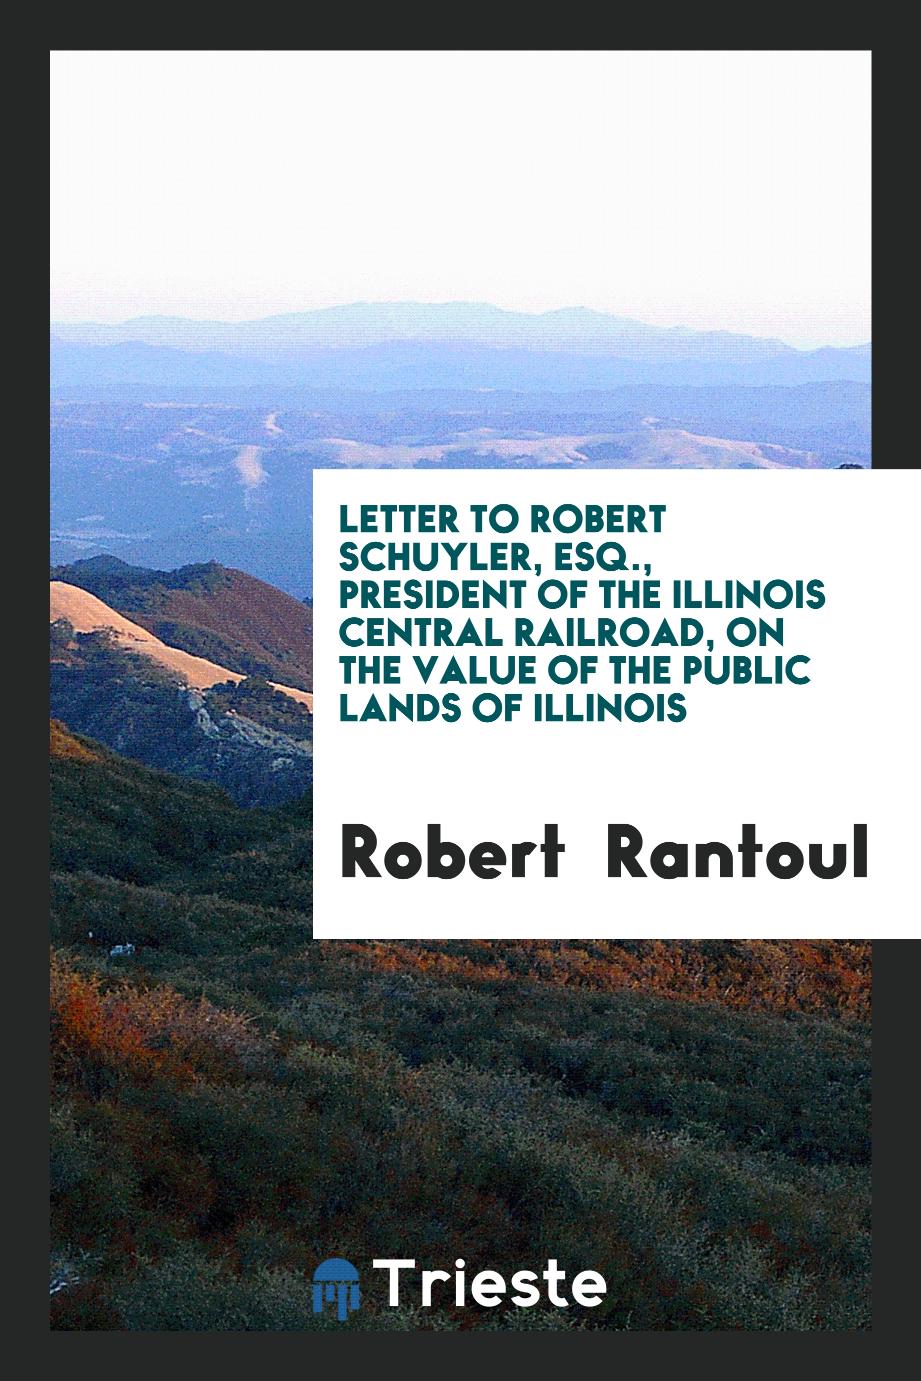 Letter to Robert Schuyler, Esq., President of the Illinois Central Railroad, on the Value of the public lands of Illinois